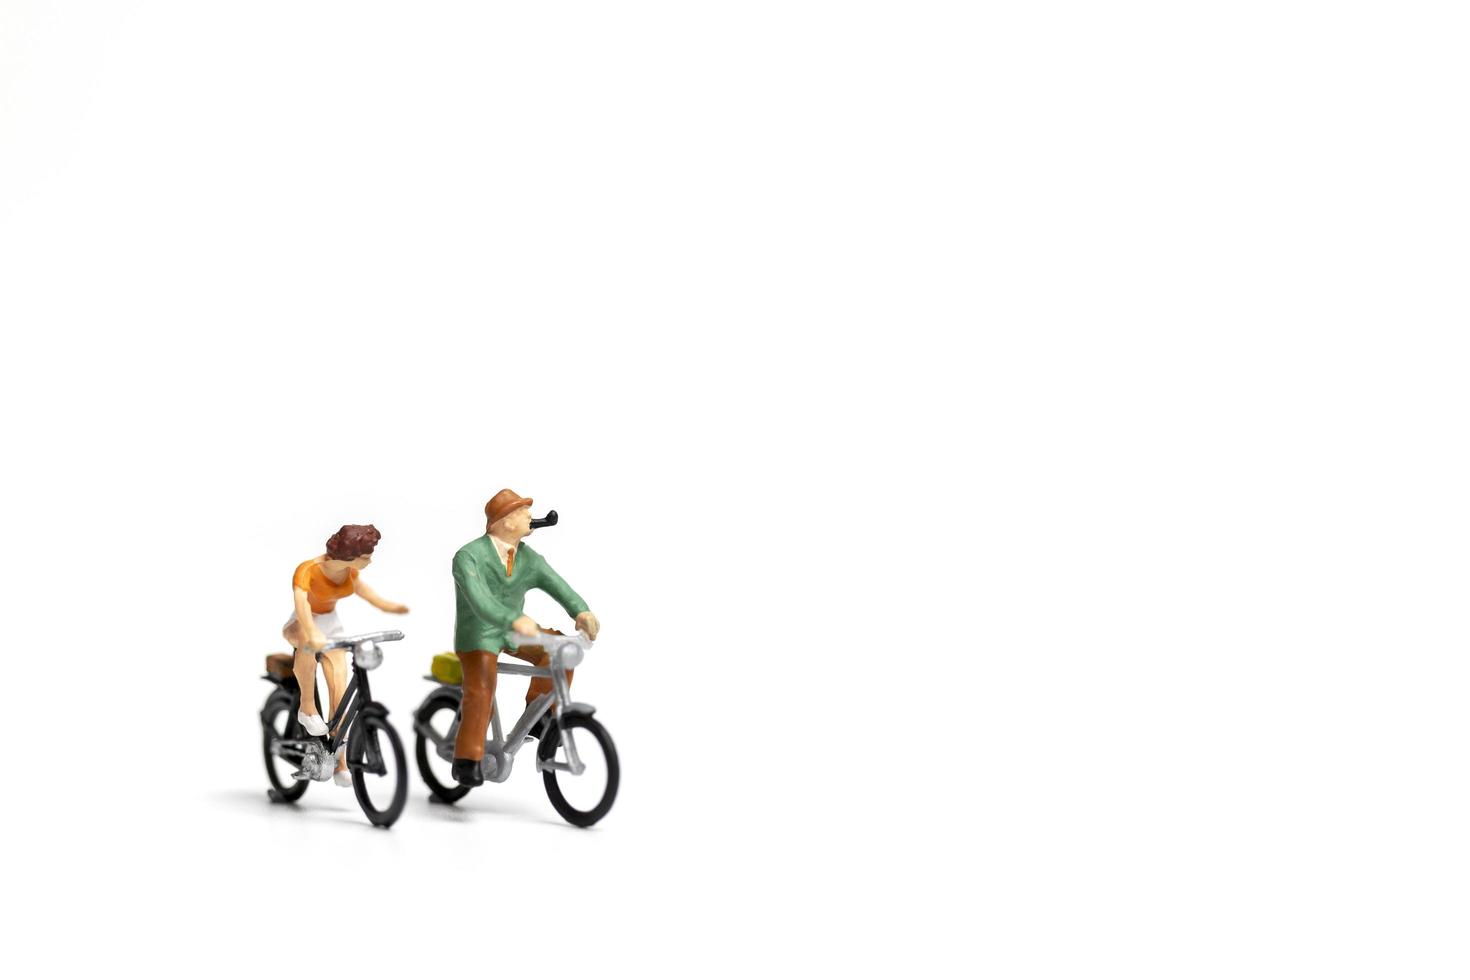 Miniature couple riding bicycles on a white background, Valentine's Day concept photo